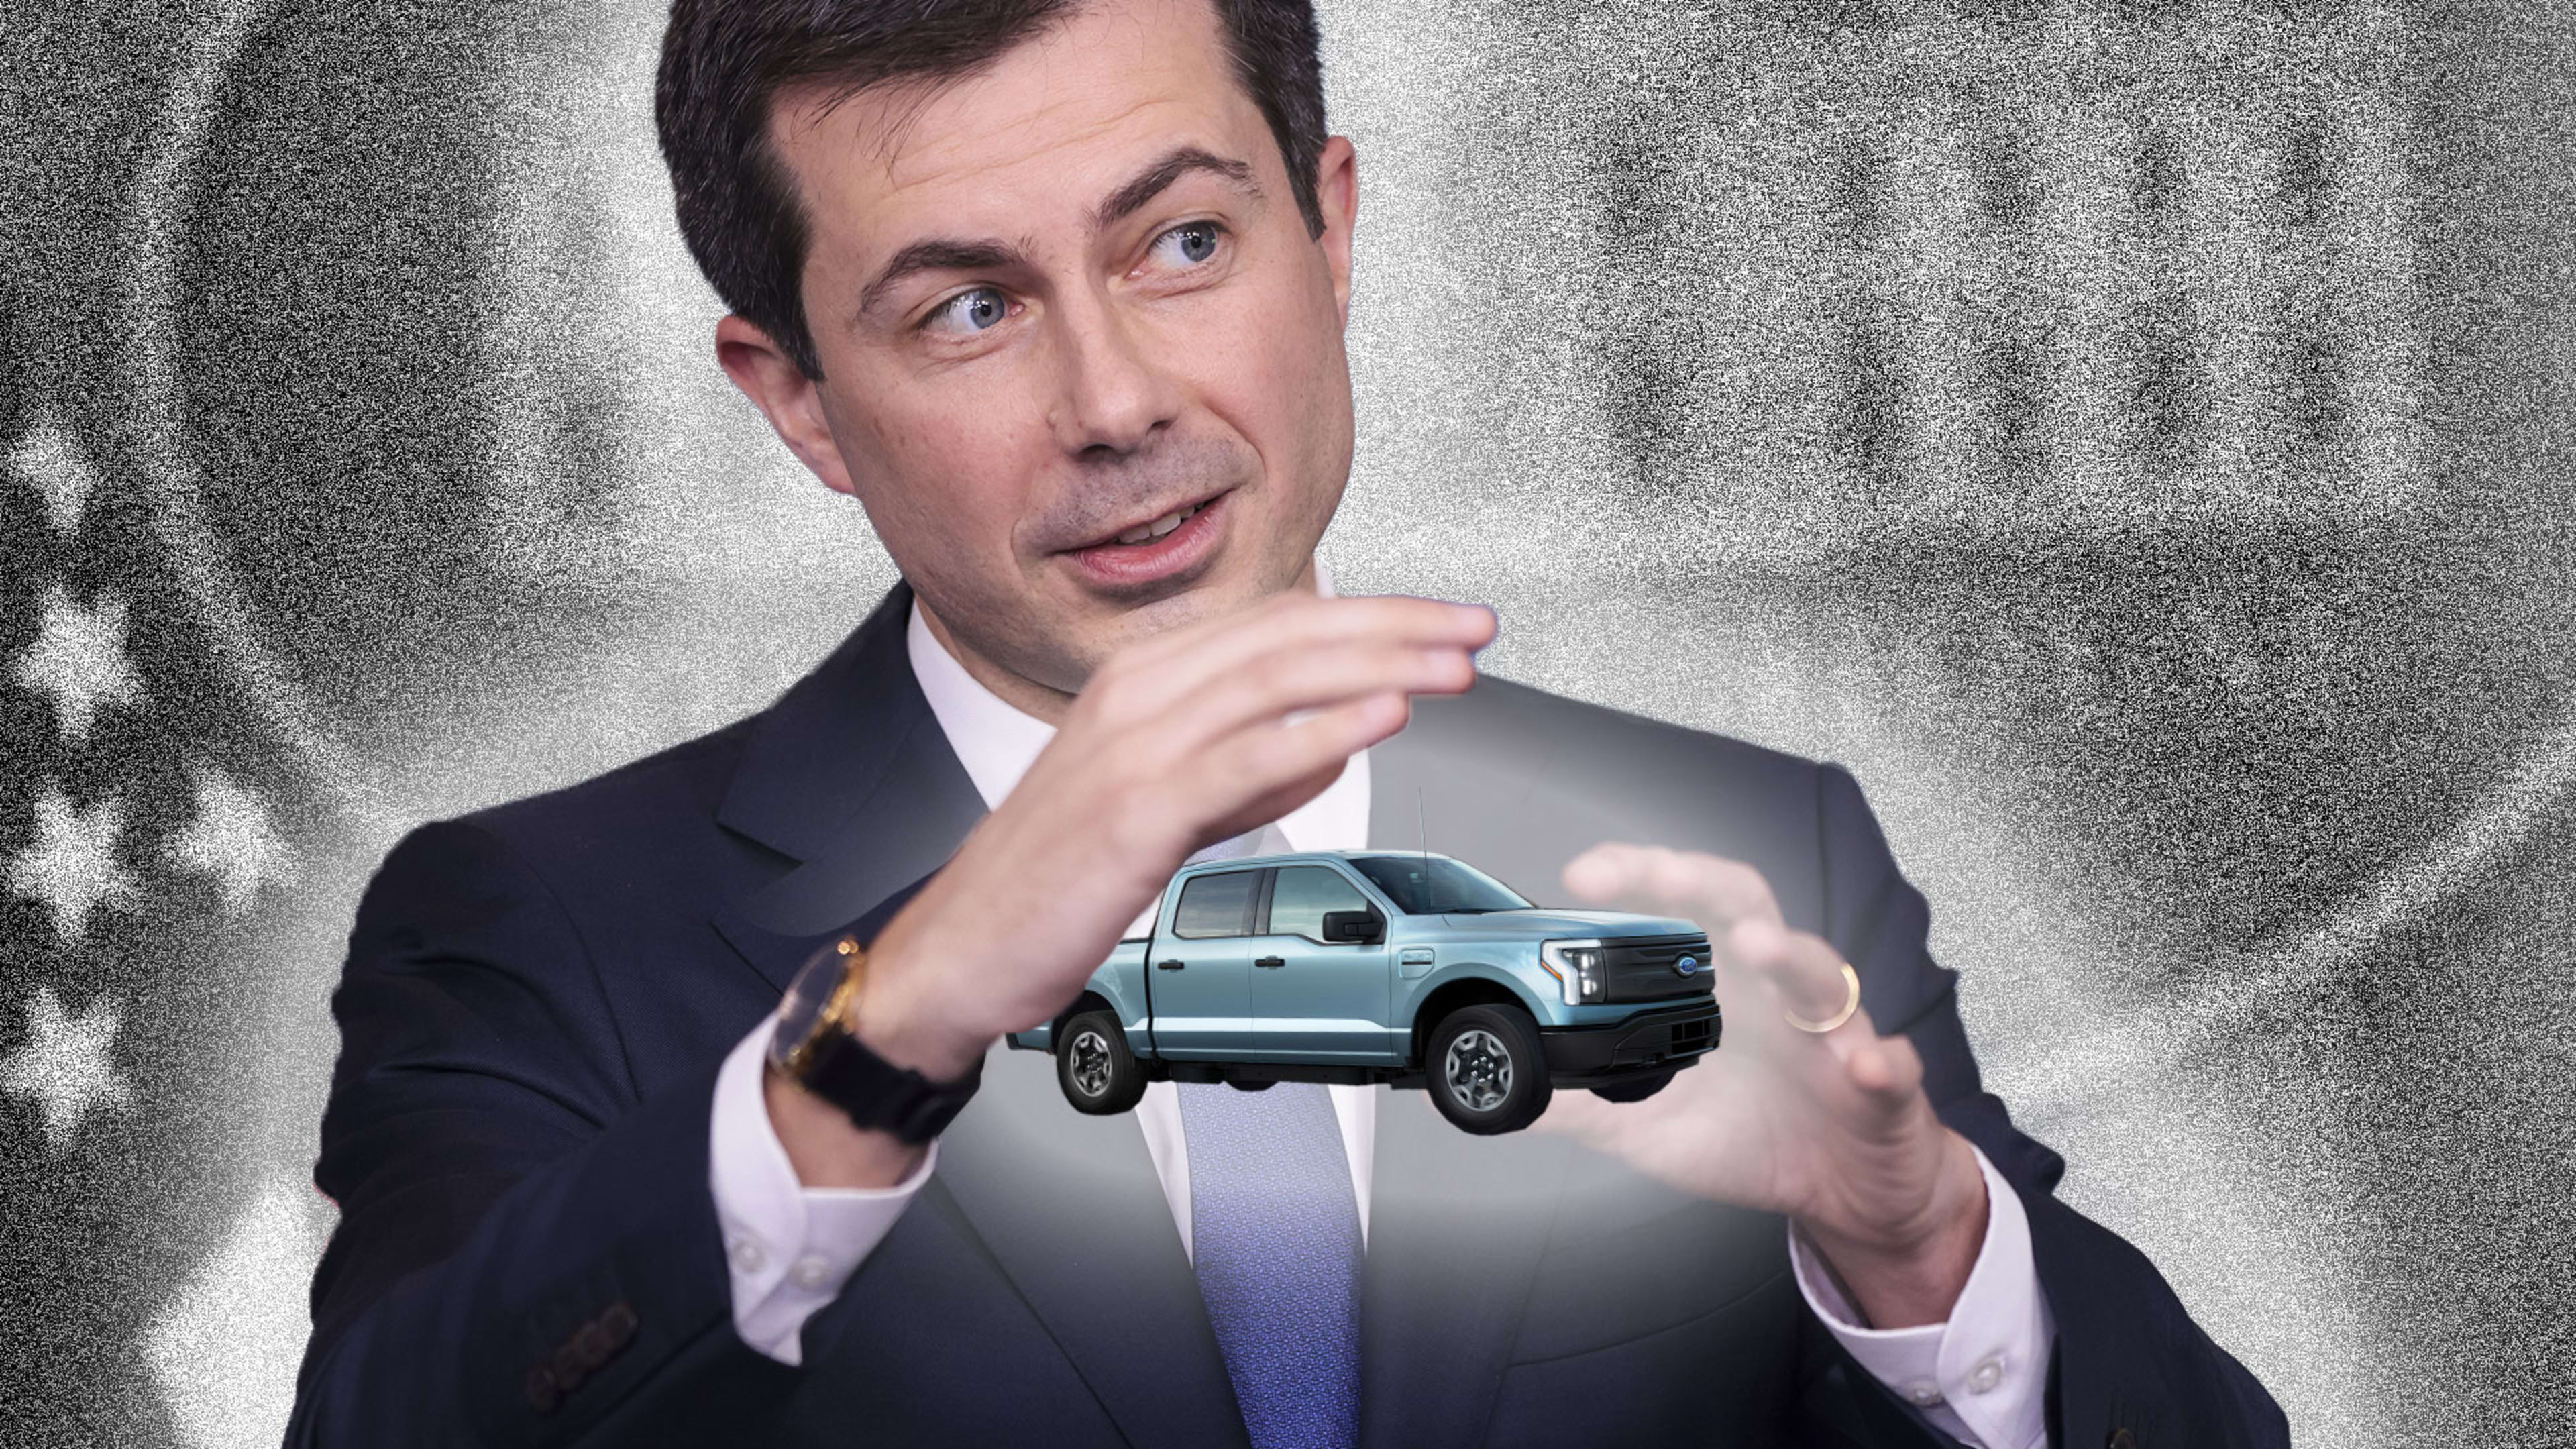 How much does an EV cost? Pete Buttigieg offers an optimistic price comparison